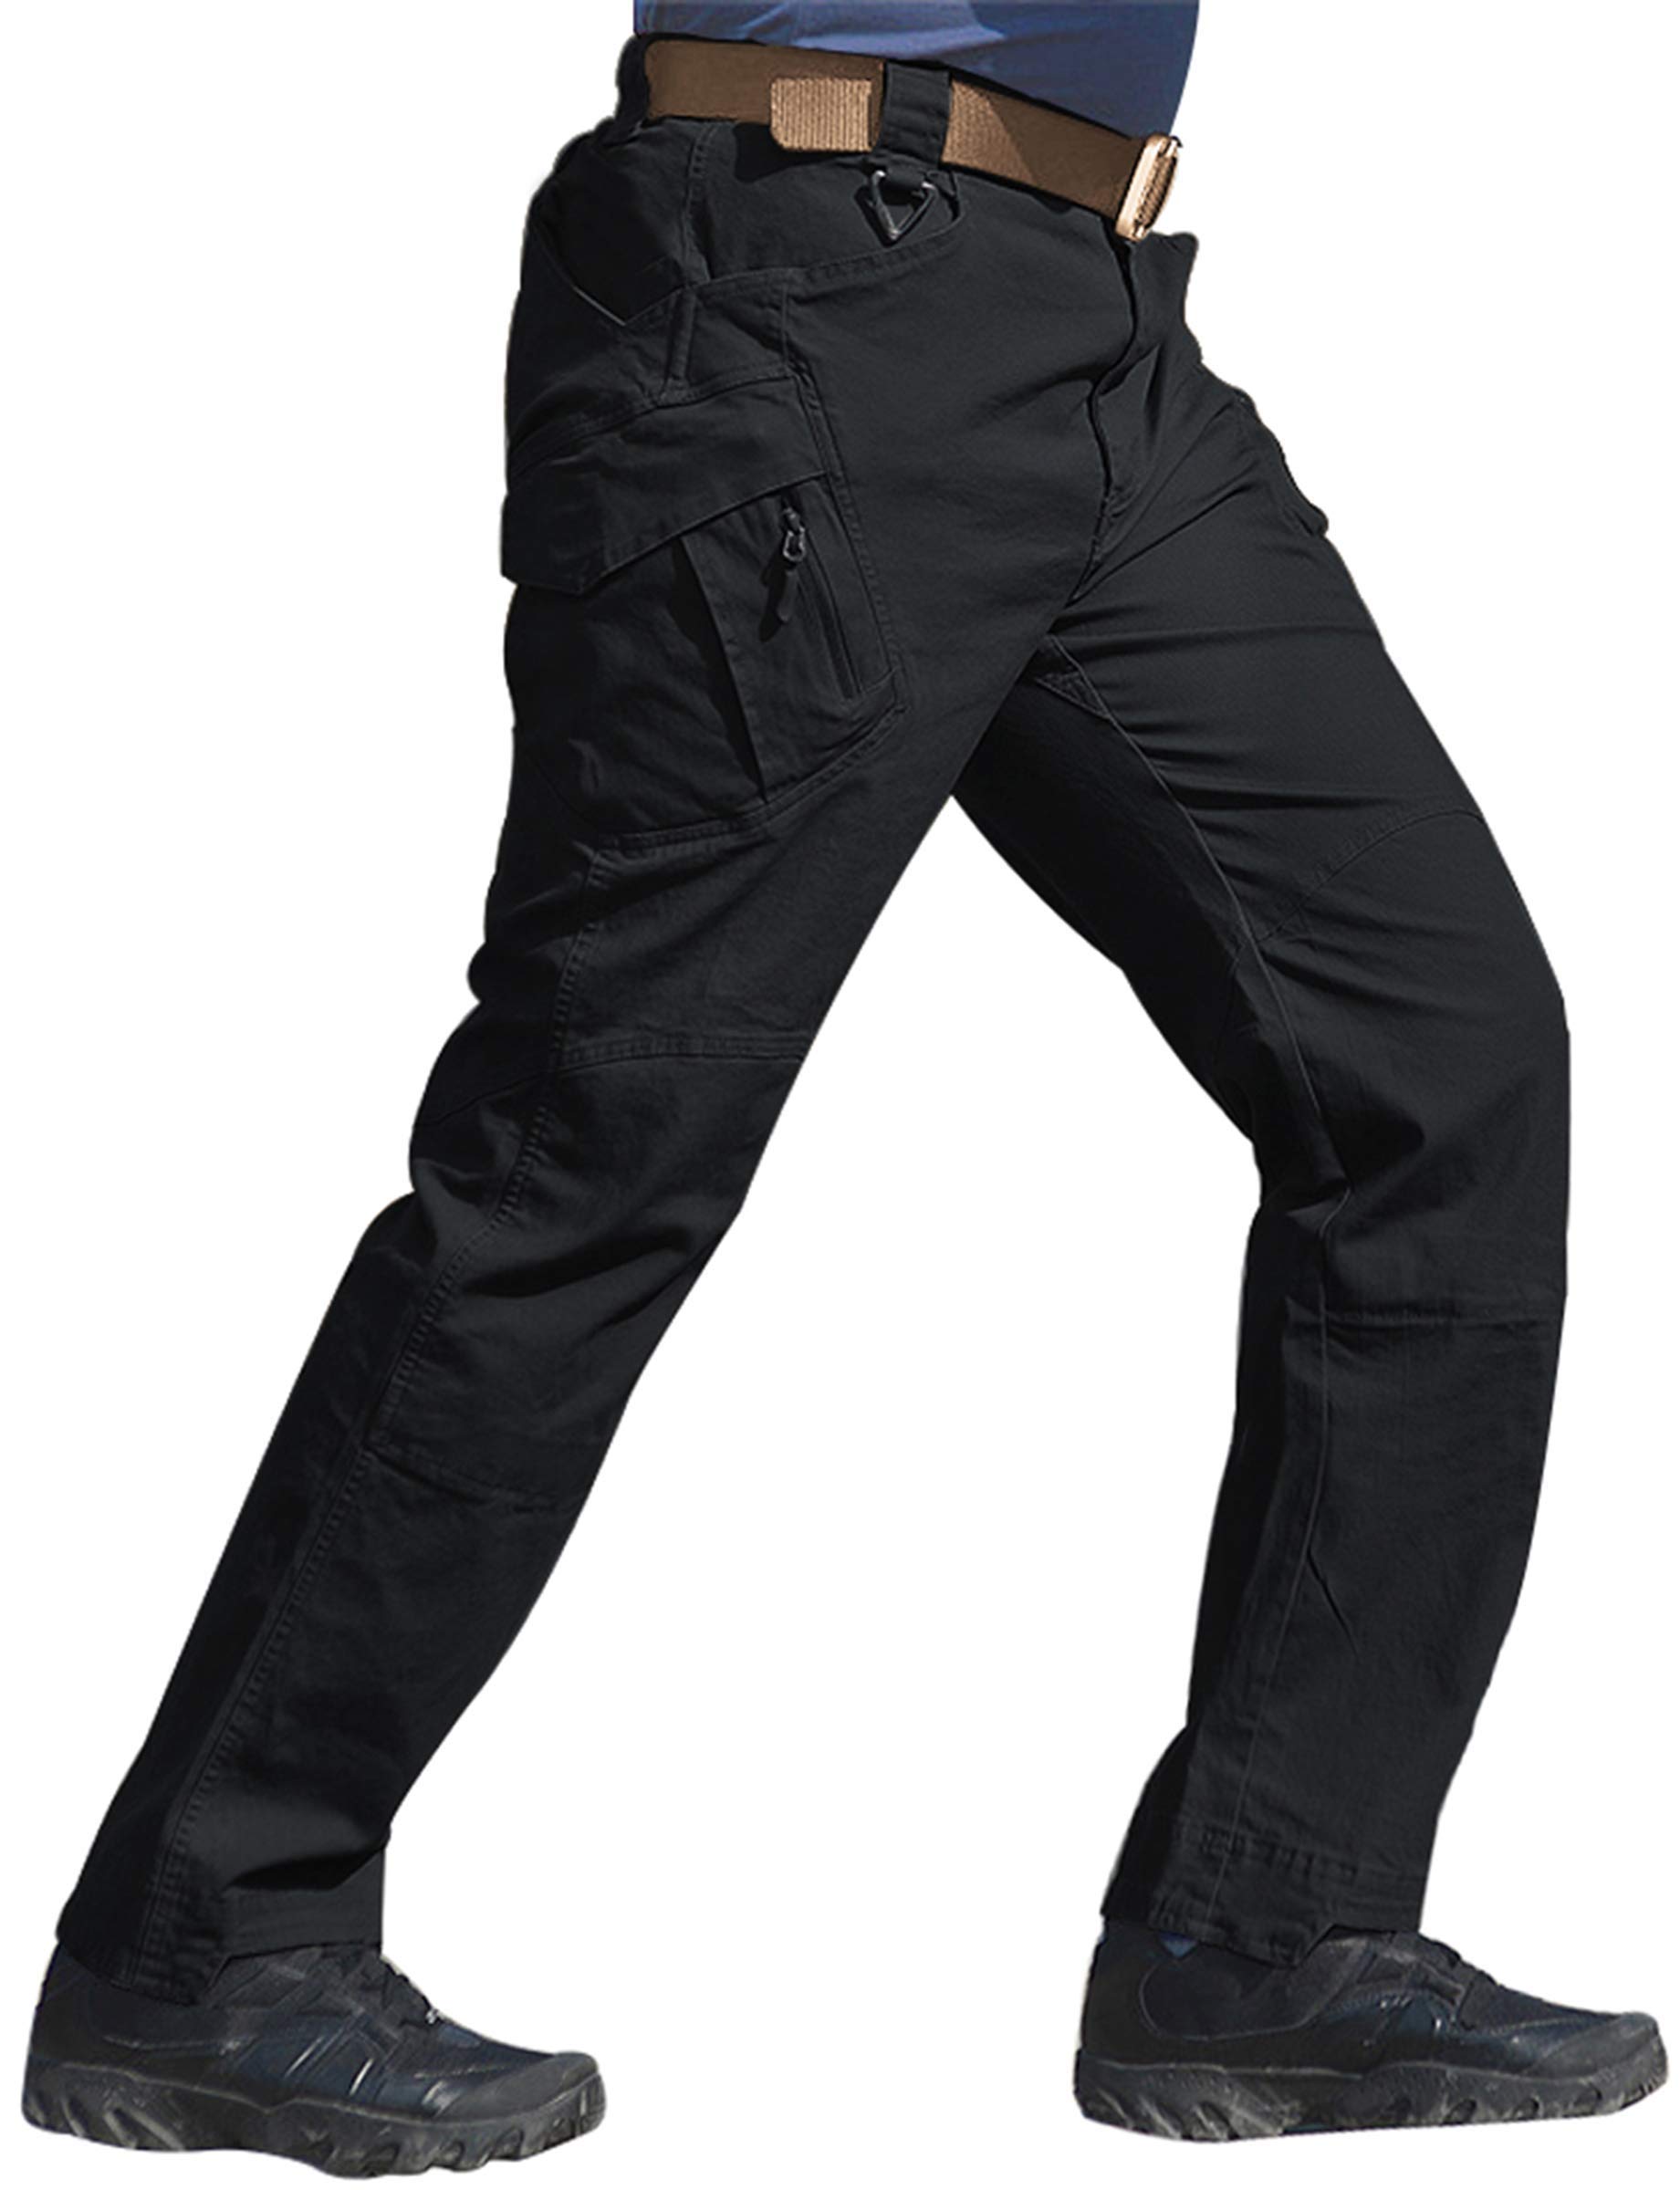 Susclude Men's Tactical Pants Stretch, 9 Pockets Rip Stop Lightweight Cargo Work Military Trousers Outdoor Hiking Pants Black 34Wx32L